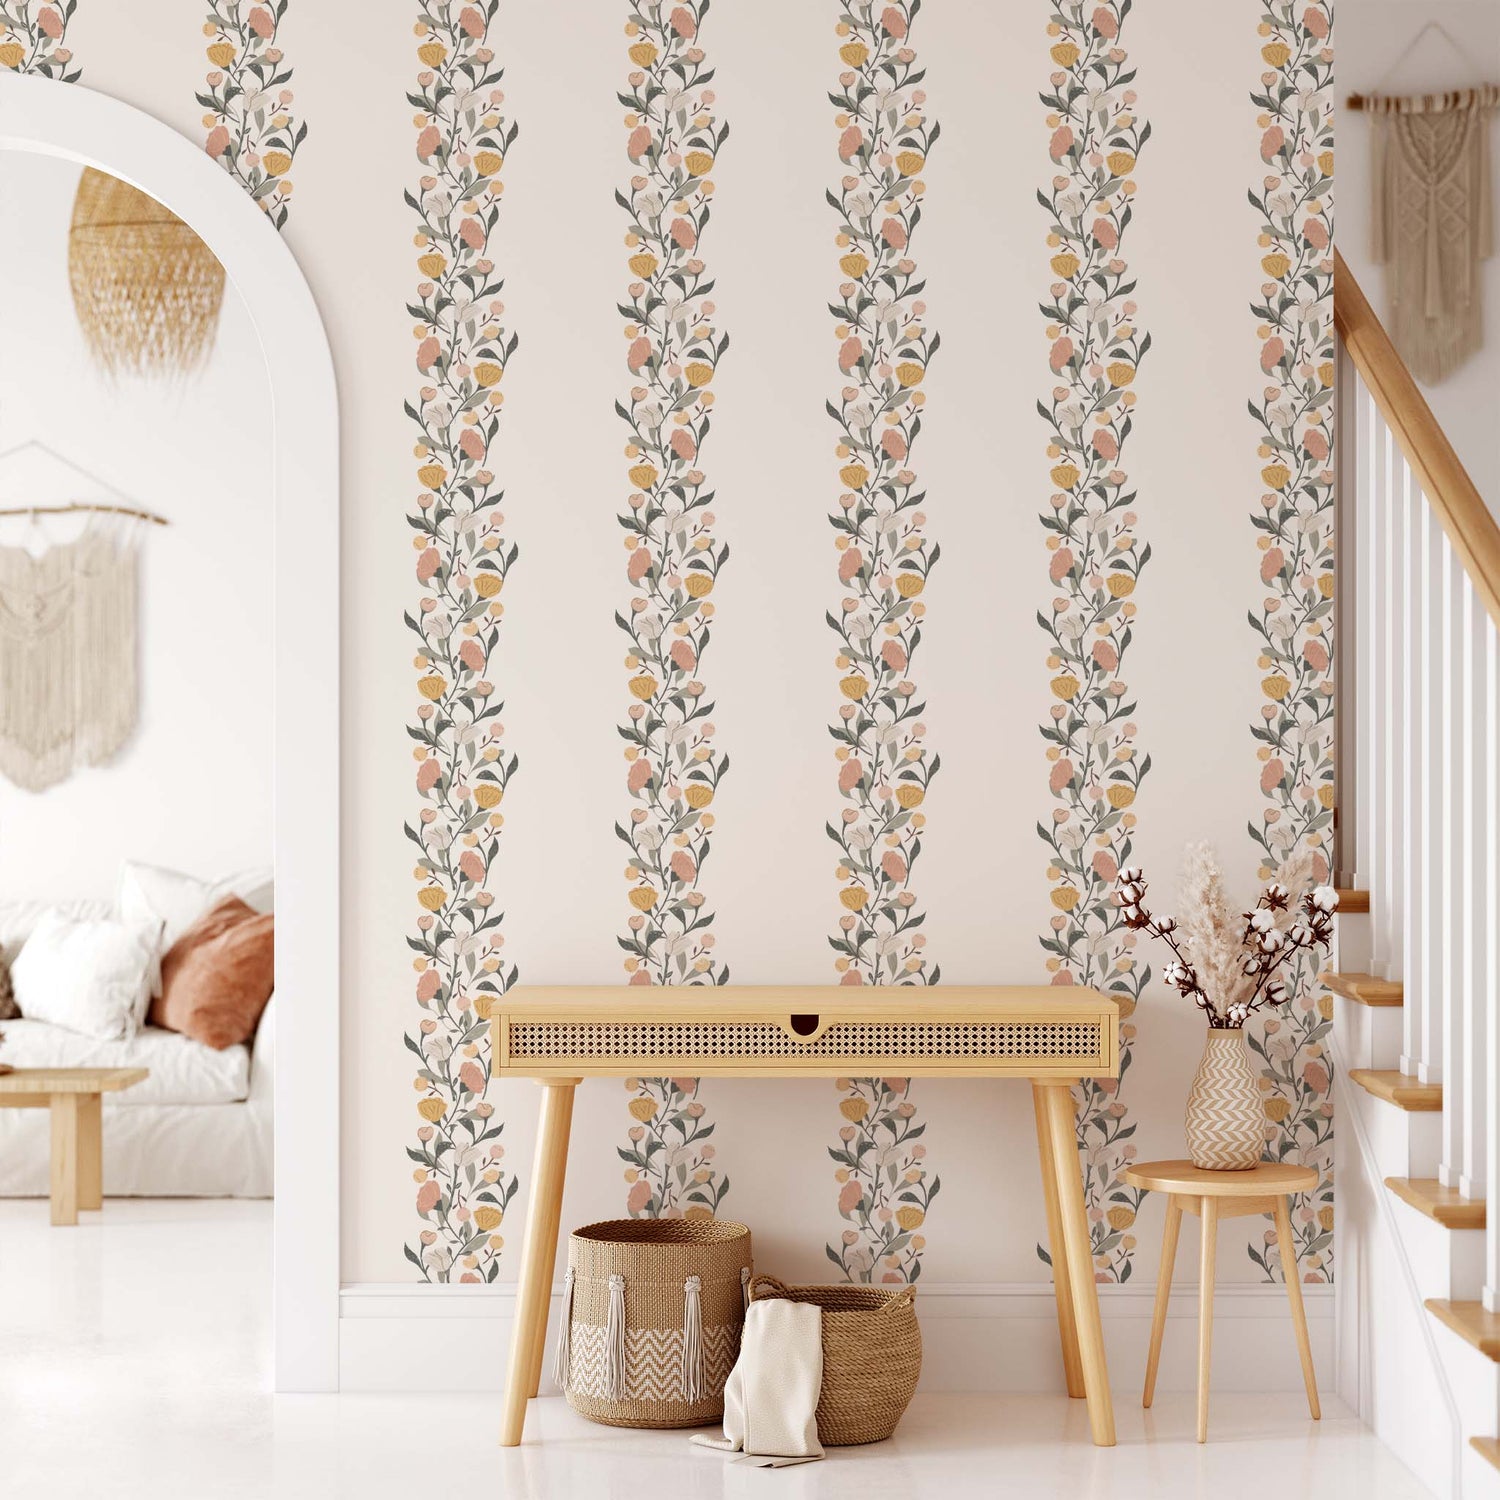 Living room preview of this Floral Stripe Wallpaper in Neutral by artist Brenda Bird for Ayara.